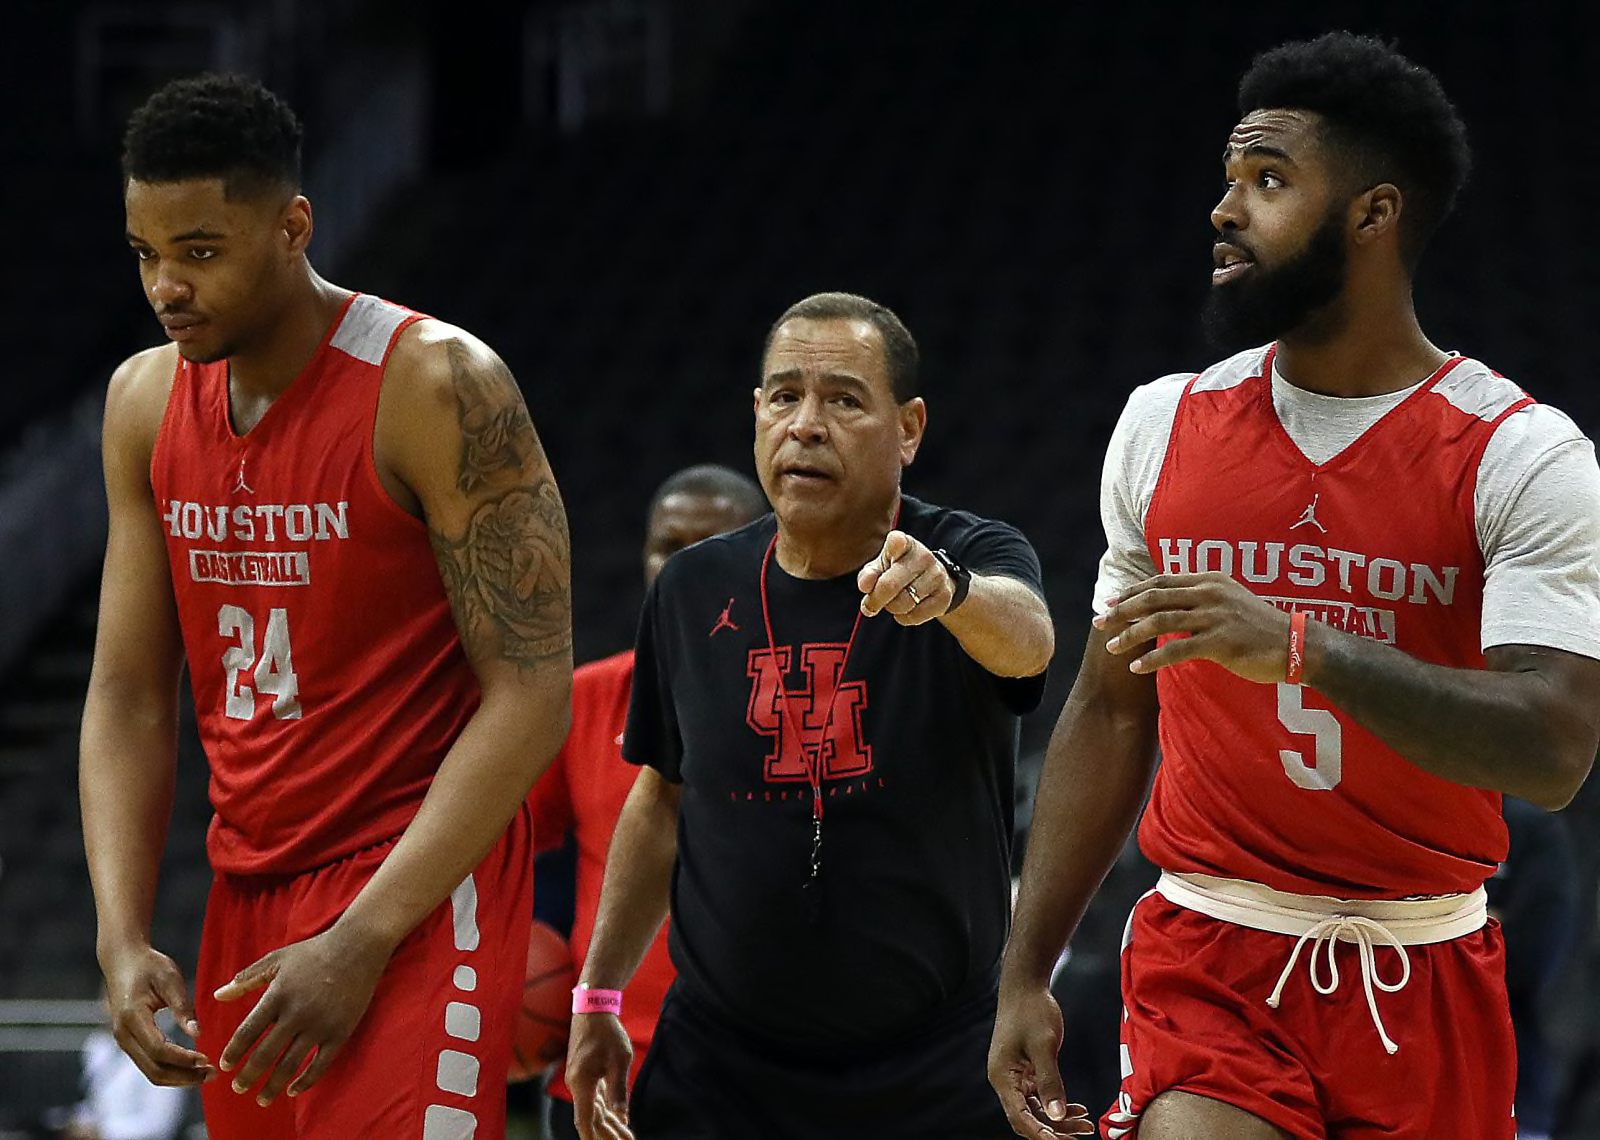 Houston Basketball 202021 season preview for the Cougars Page 5